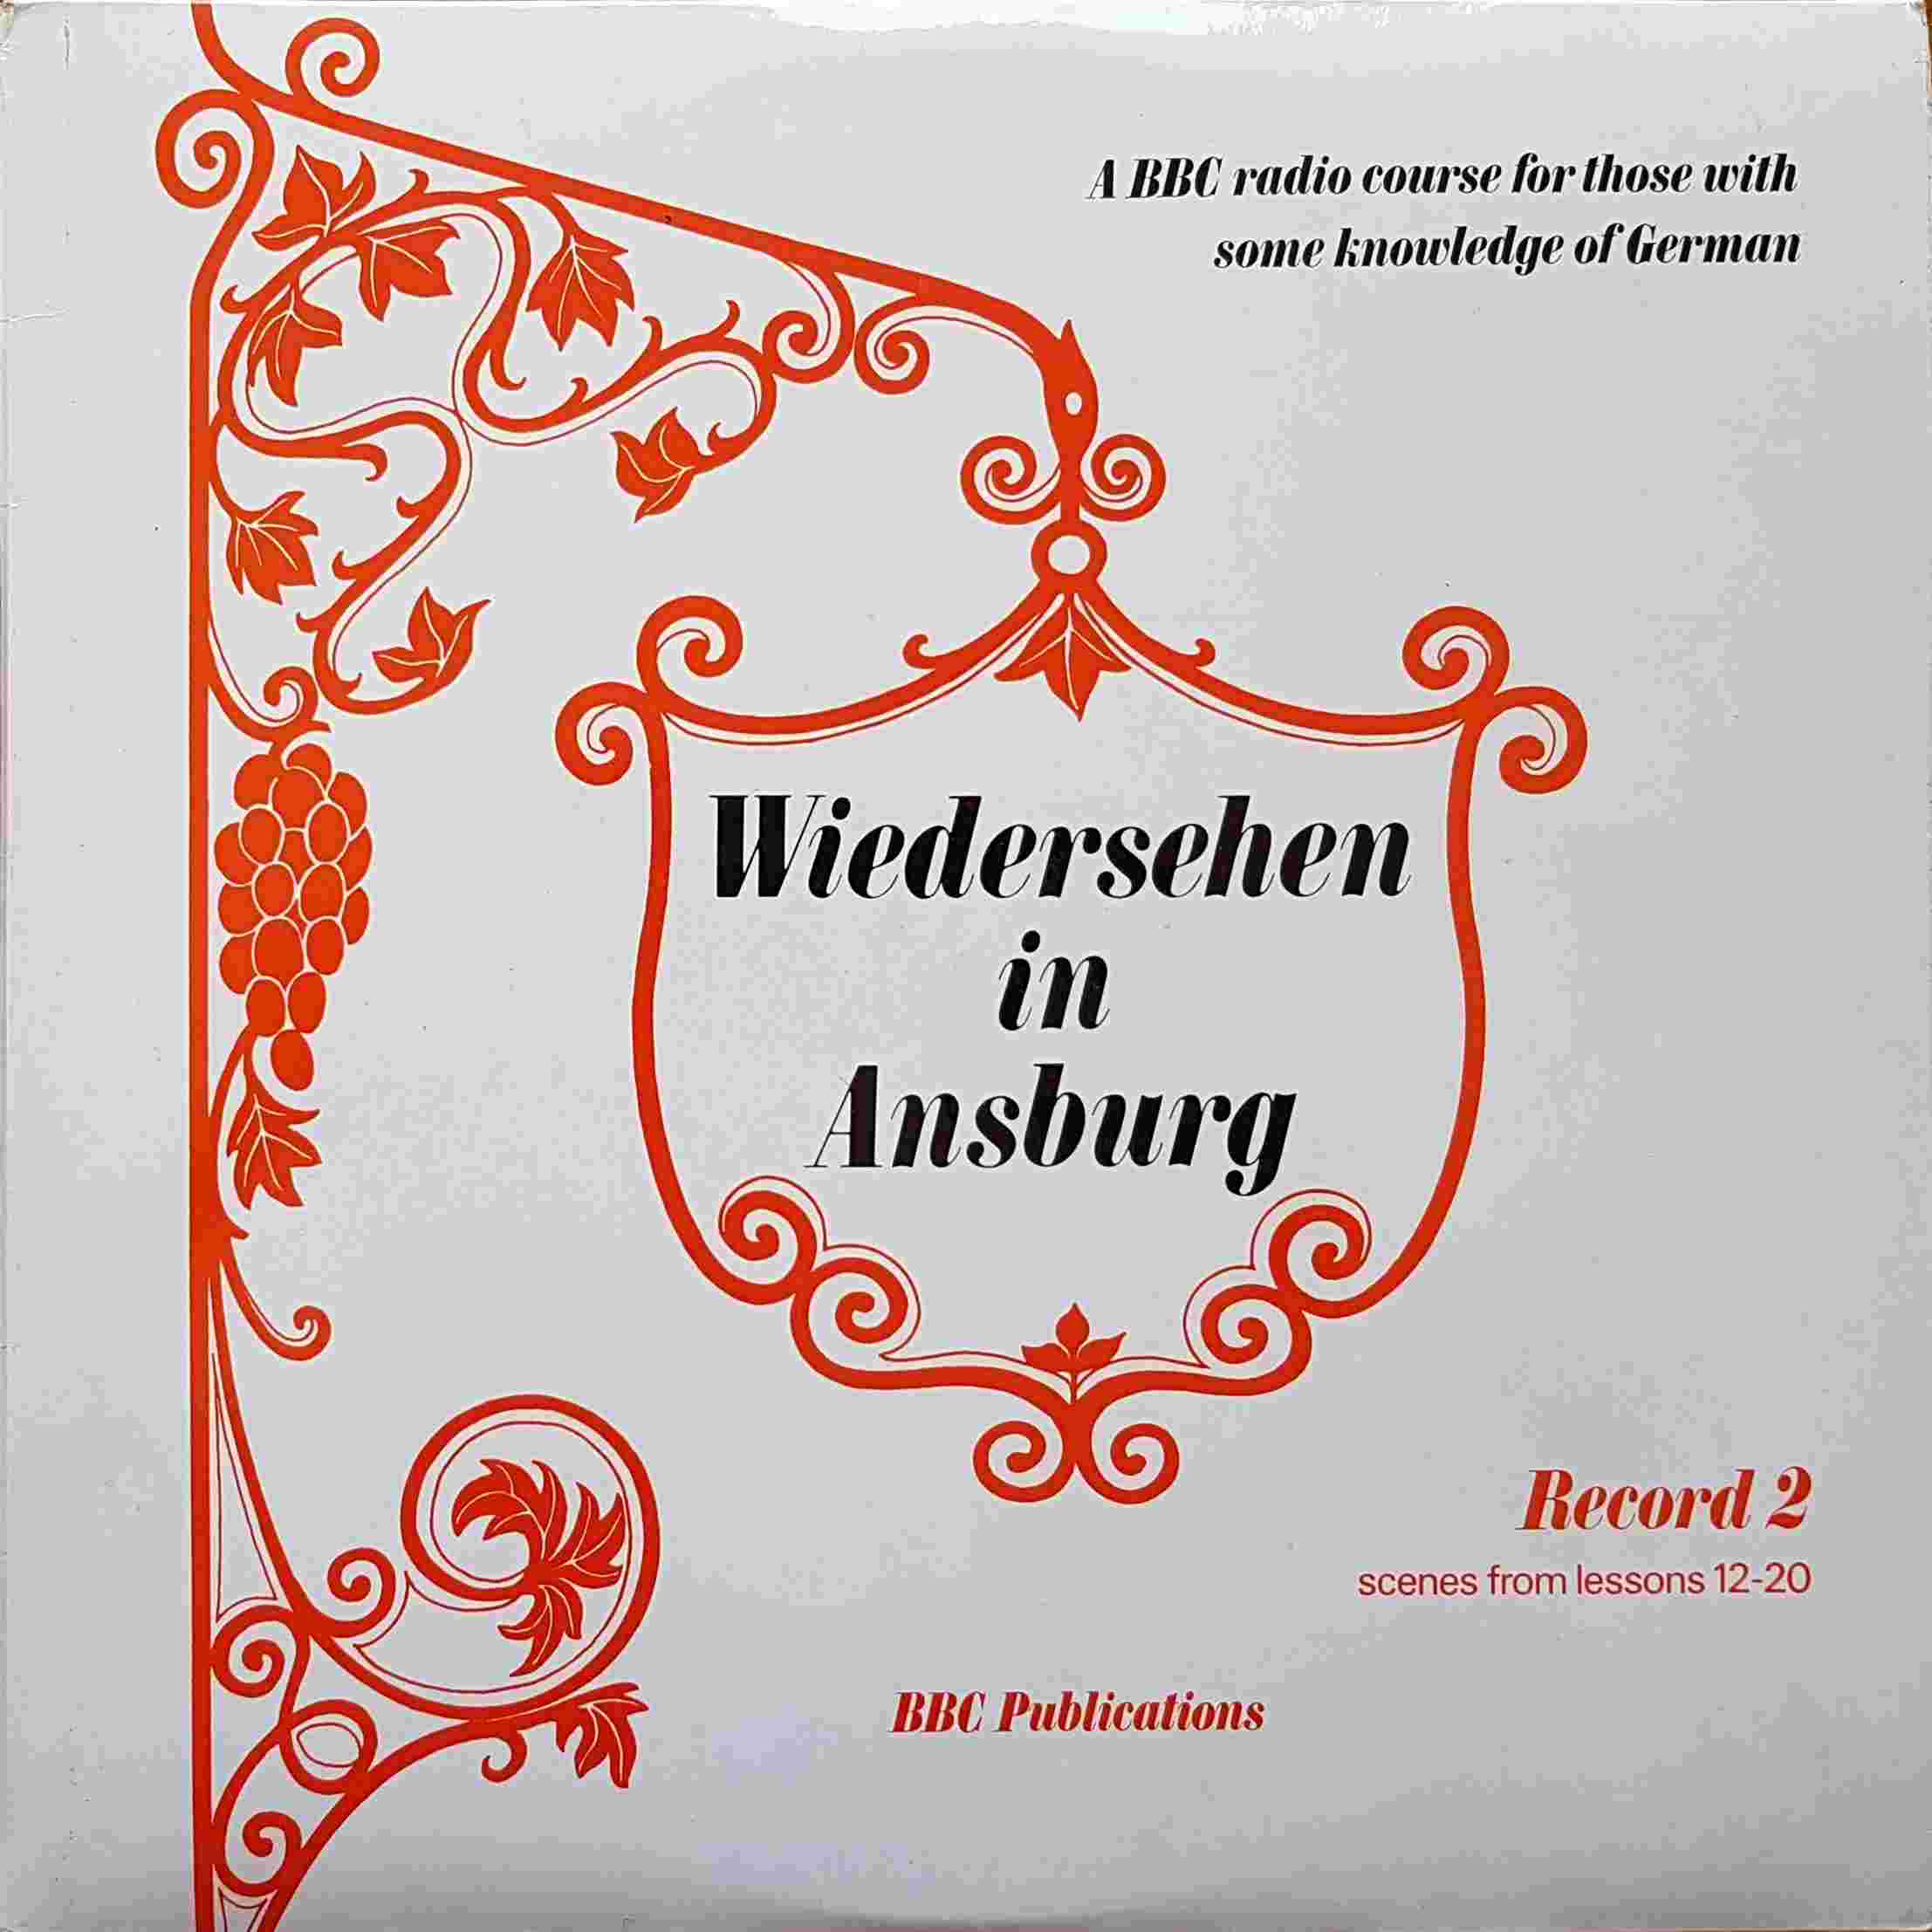 Picture of OP 155/156 Wiedersehen in Ansburg - A BBC radio course for those with some knowledge of German - Record 2 - Lessons 12 - 20 by artist Alexandra Marchl-von-Herwarth / Edith R. Baer from the BBC albums - Records and Tapes library